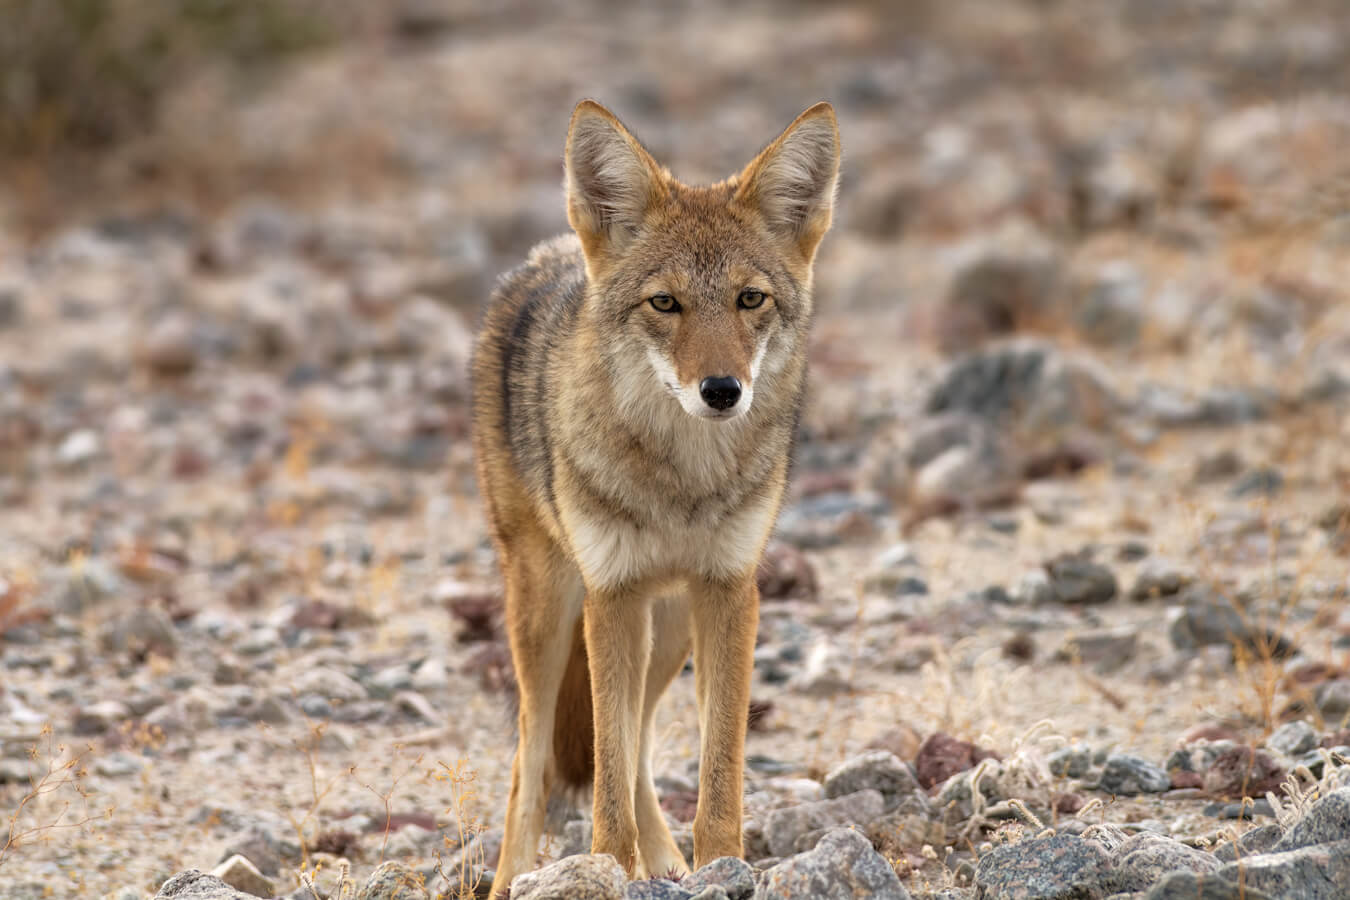 Coyote in Death Valley, Death Valley National Park, California and Nevada | Photo Credit: Shutterstock / Angel DiBilio